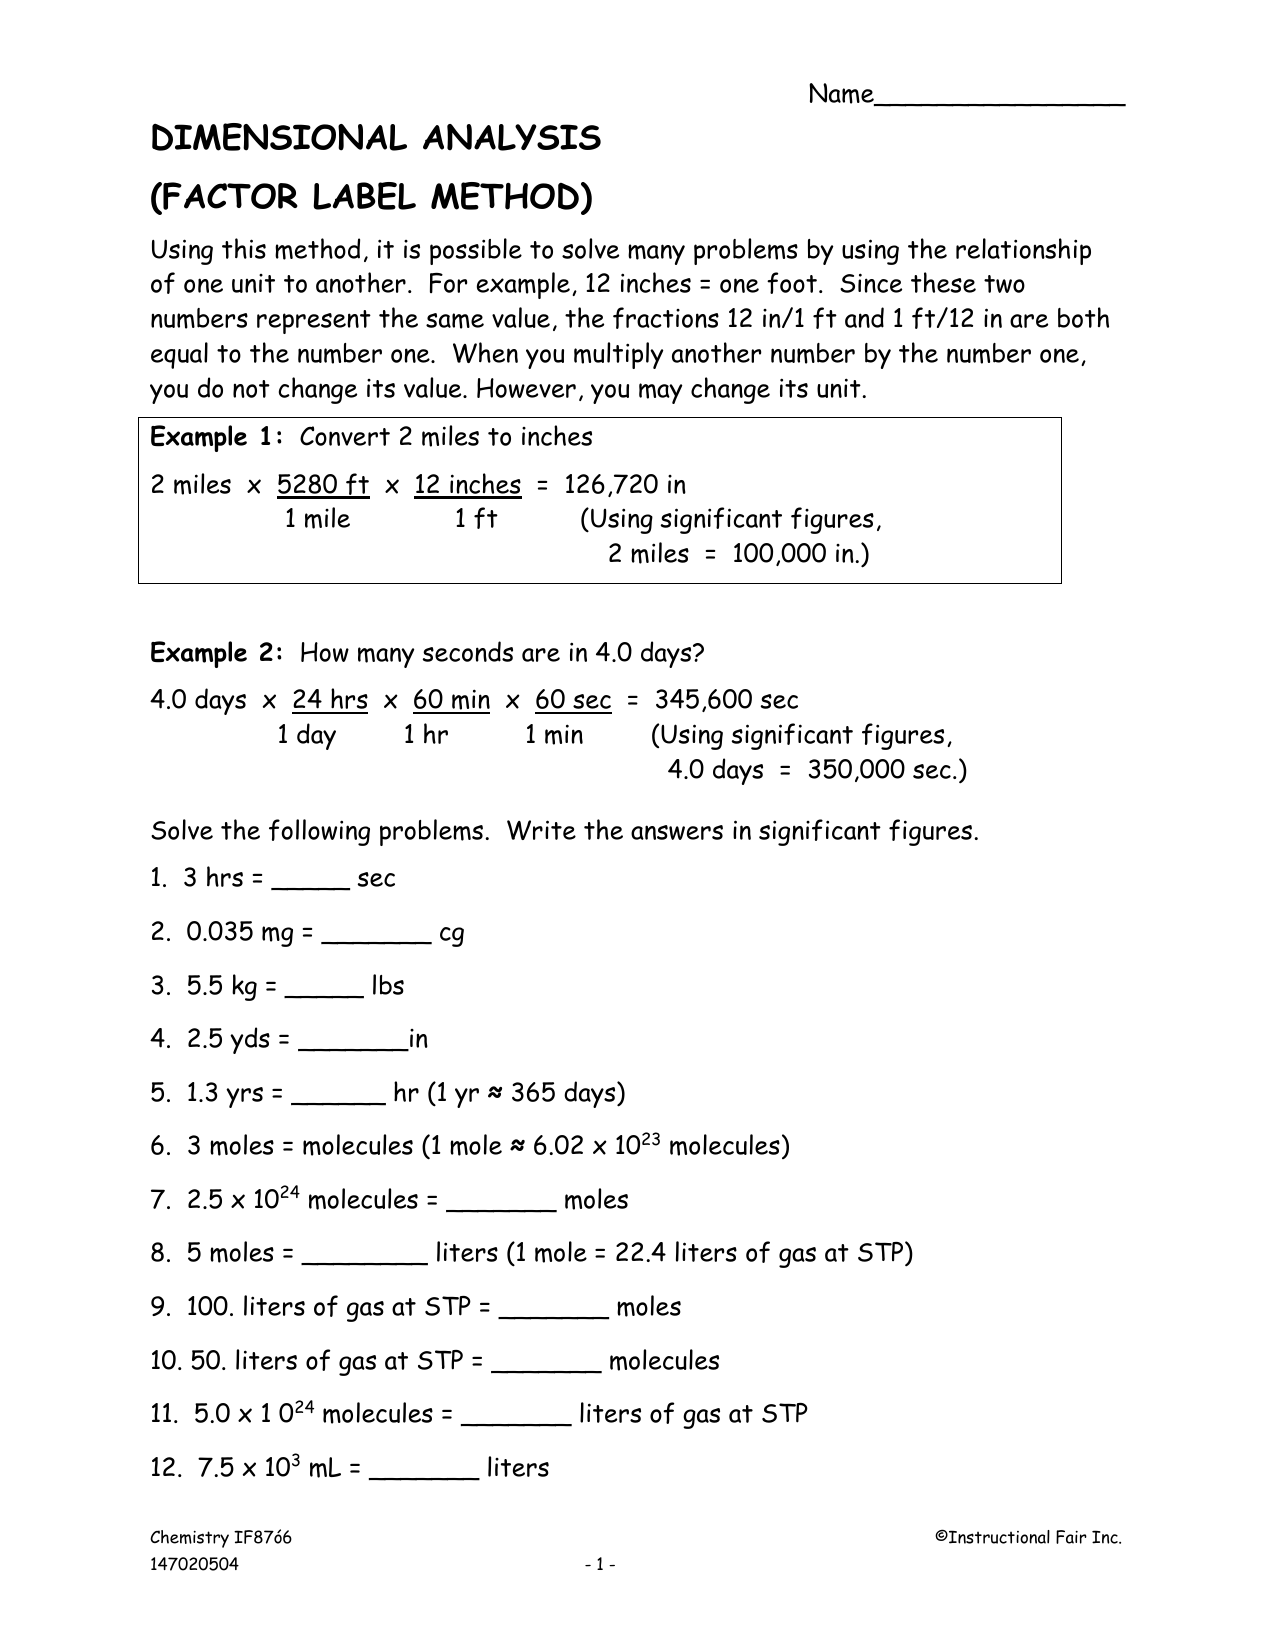 dimensional analysis - Dr. Vernon- With Dimensional Analysis Worksheet Answers Chemistry